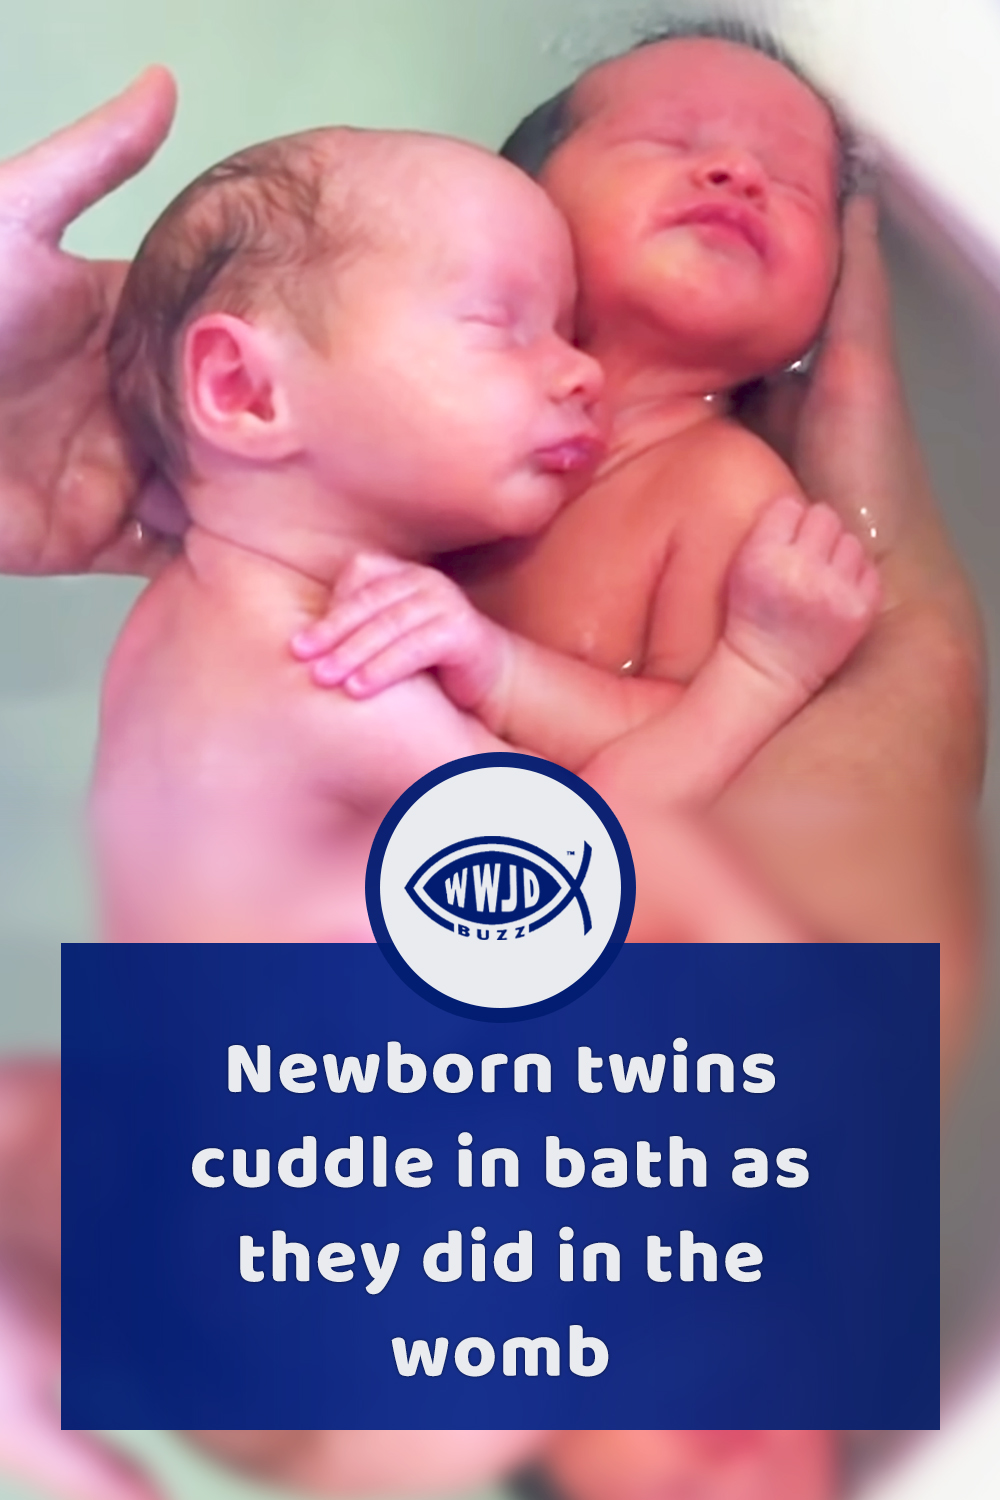 Newborn twins cuddle in bath as they did in the womb